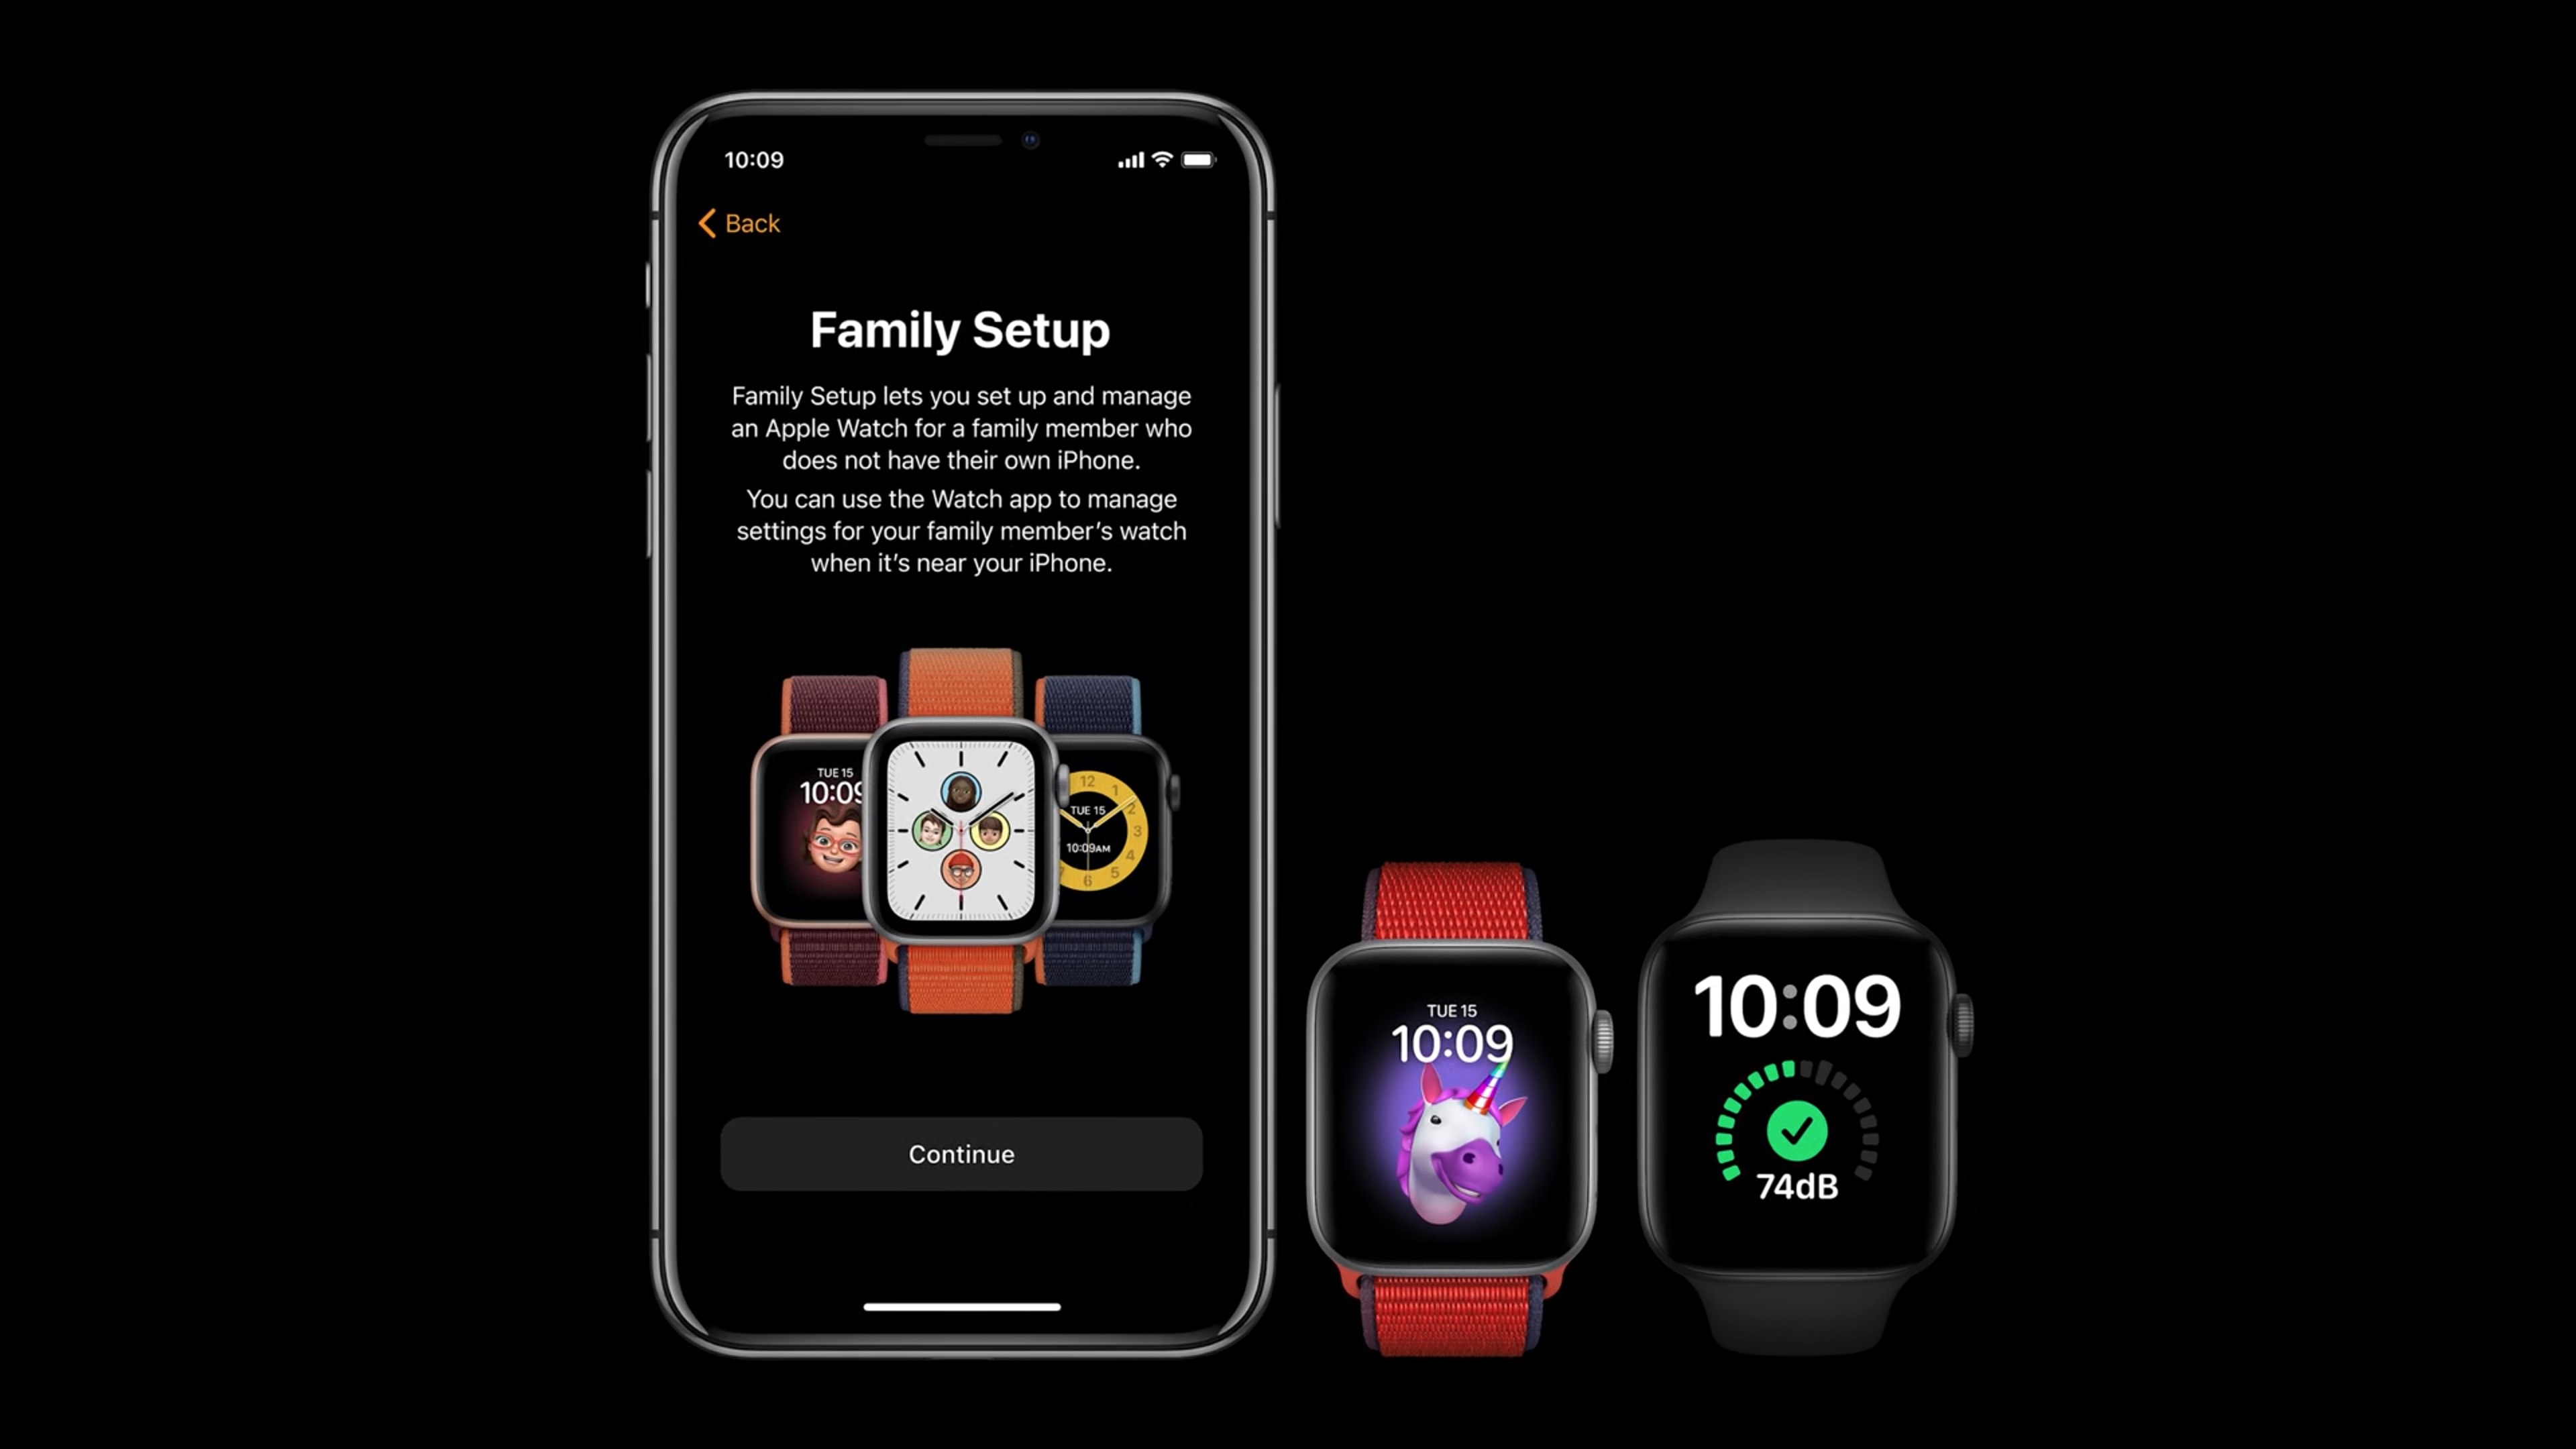 Family Setup will work with Apple Watch Series 4 and greater (and certain launch partners)